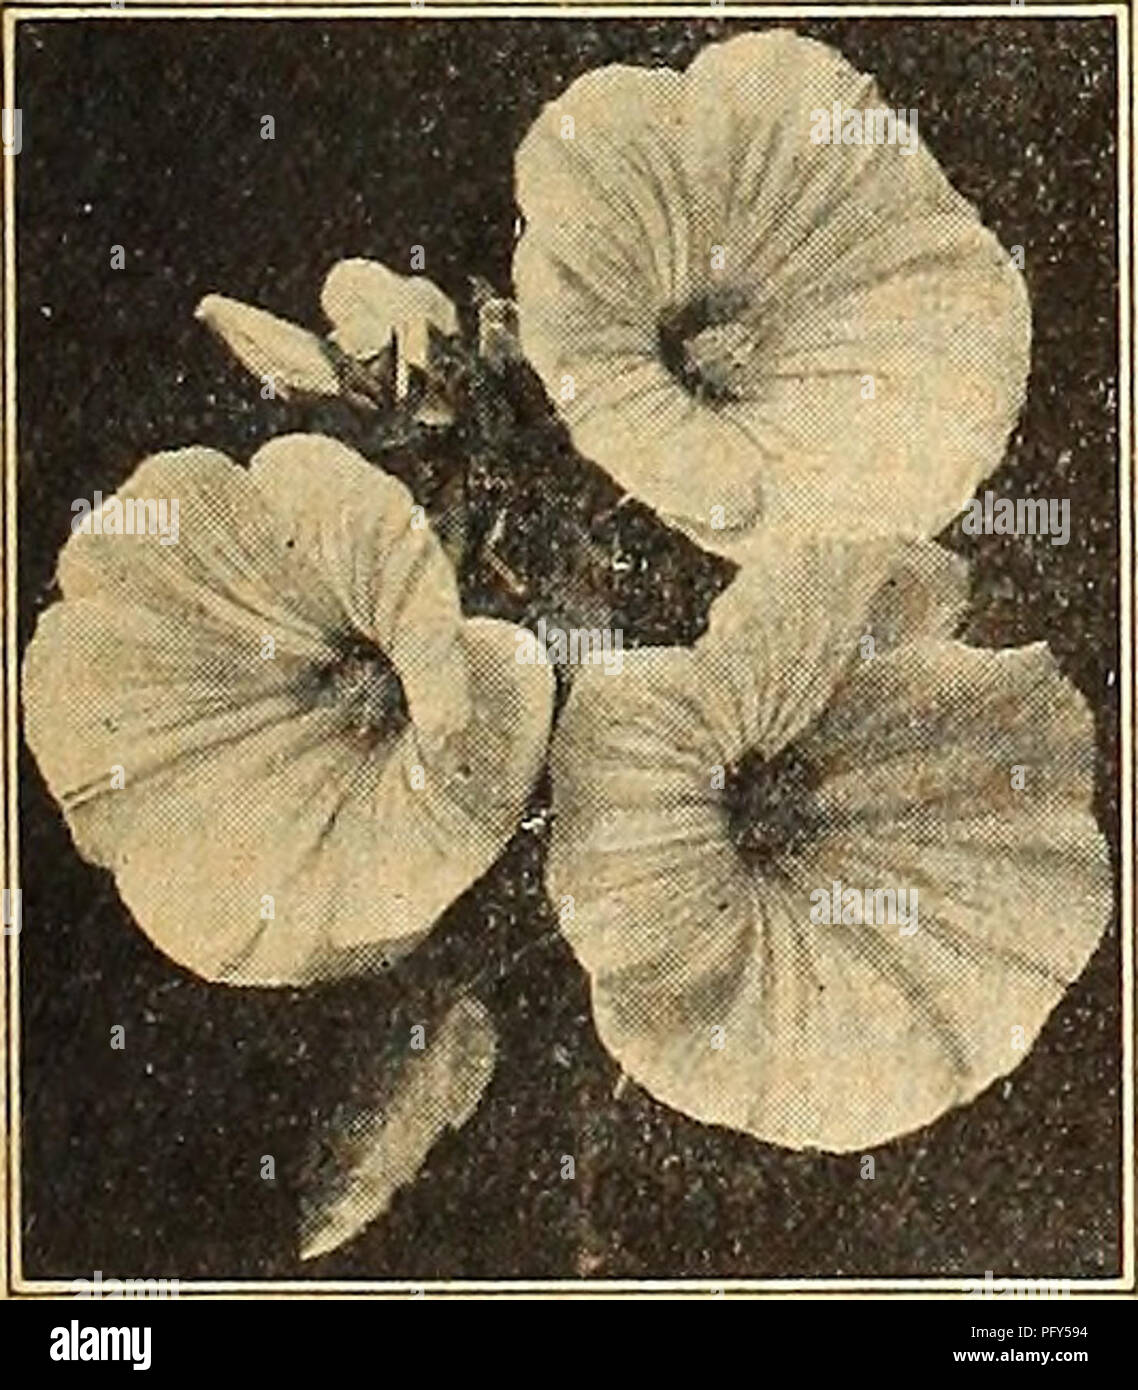 . Currie's farm and garden annual : spring 1920 45th year. Flowers Seeds Catalogs; Bulbs (Plants) Seeds Catalogs; Vegetables Seeds Catalogs; Nurseries (Horticulture) Catalogs; Plants, Ornamental Catalogs; Gardening Equipment and supplies Catalogs. Marigold, Legion of Honor. African Slarigold. LAVATERA—Mallow. Arborea Variegata (Tree Mallovr)—Red flowers. Strikingly handsome, large, mottled foliage. 4 feet. H. B. Splendens Mixed (Annual MalloTv)—Flowers large, brilliant, rosy pink and pure glossy white, very fine for cutting. 3 feet. H. A 10 10 LUNARIA BIENNIS (Honesty or Silver Dollar Plant&gt Stock Photo